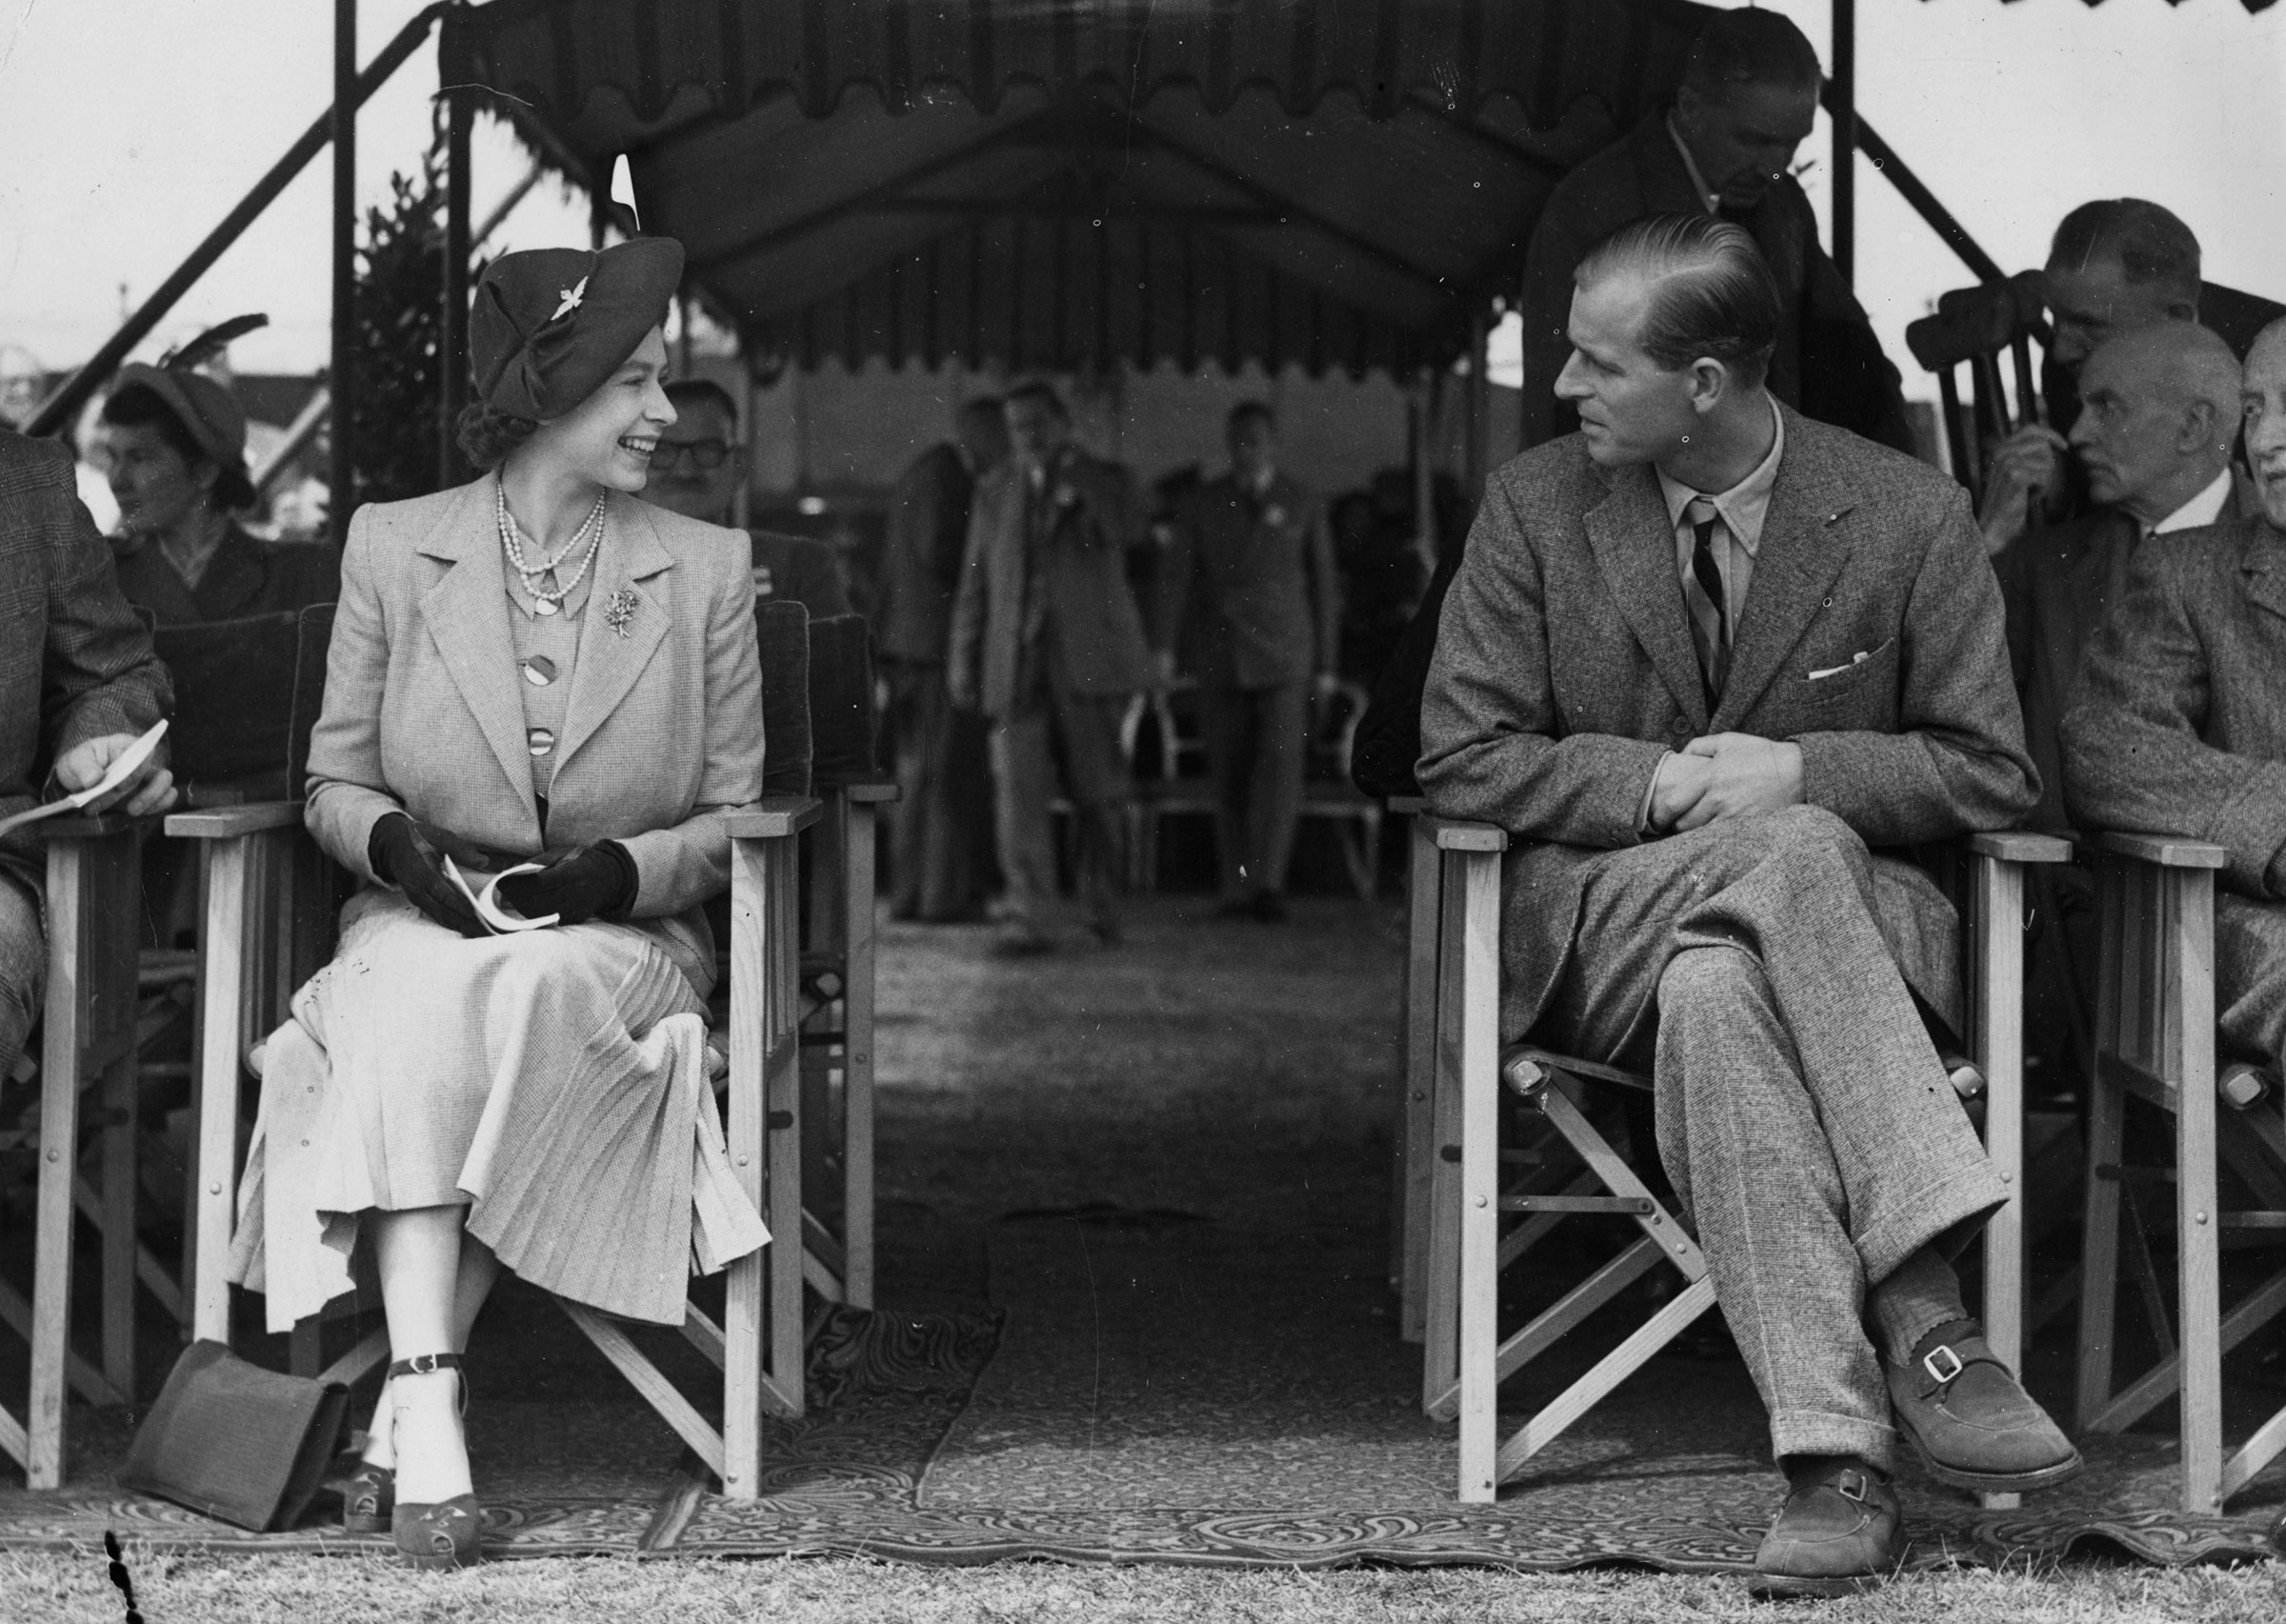 Princess Elizabeth and the Duke of Edinburgh attending the Royal Horse Show at Windsor on May 12, 1949. (Douglas Miller—Keystone/Getty Images)